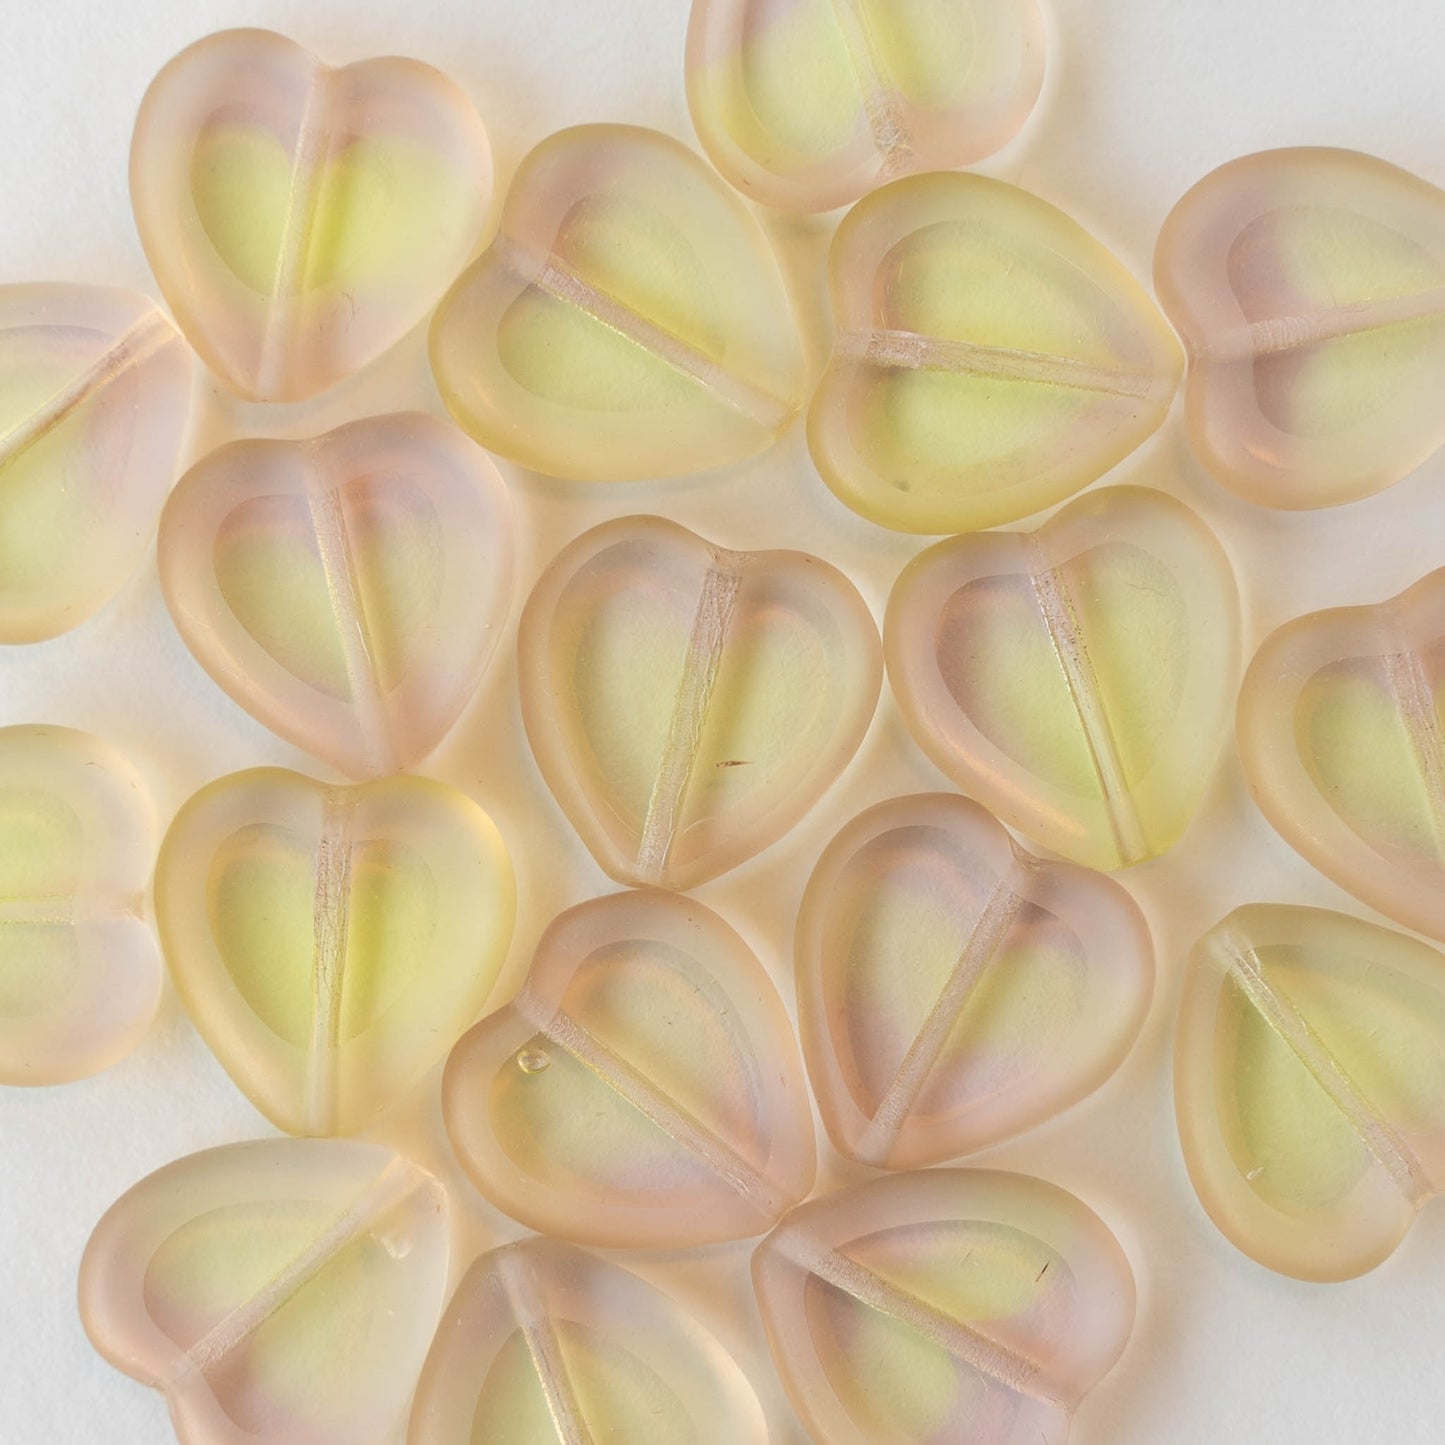 Gold Trimmed Gorgeous Heart Beads, Beautiful Metal Beads for